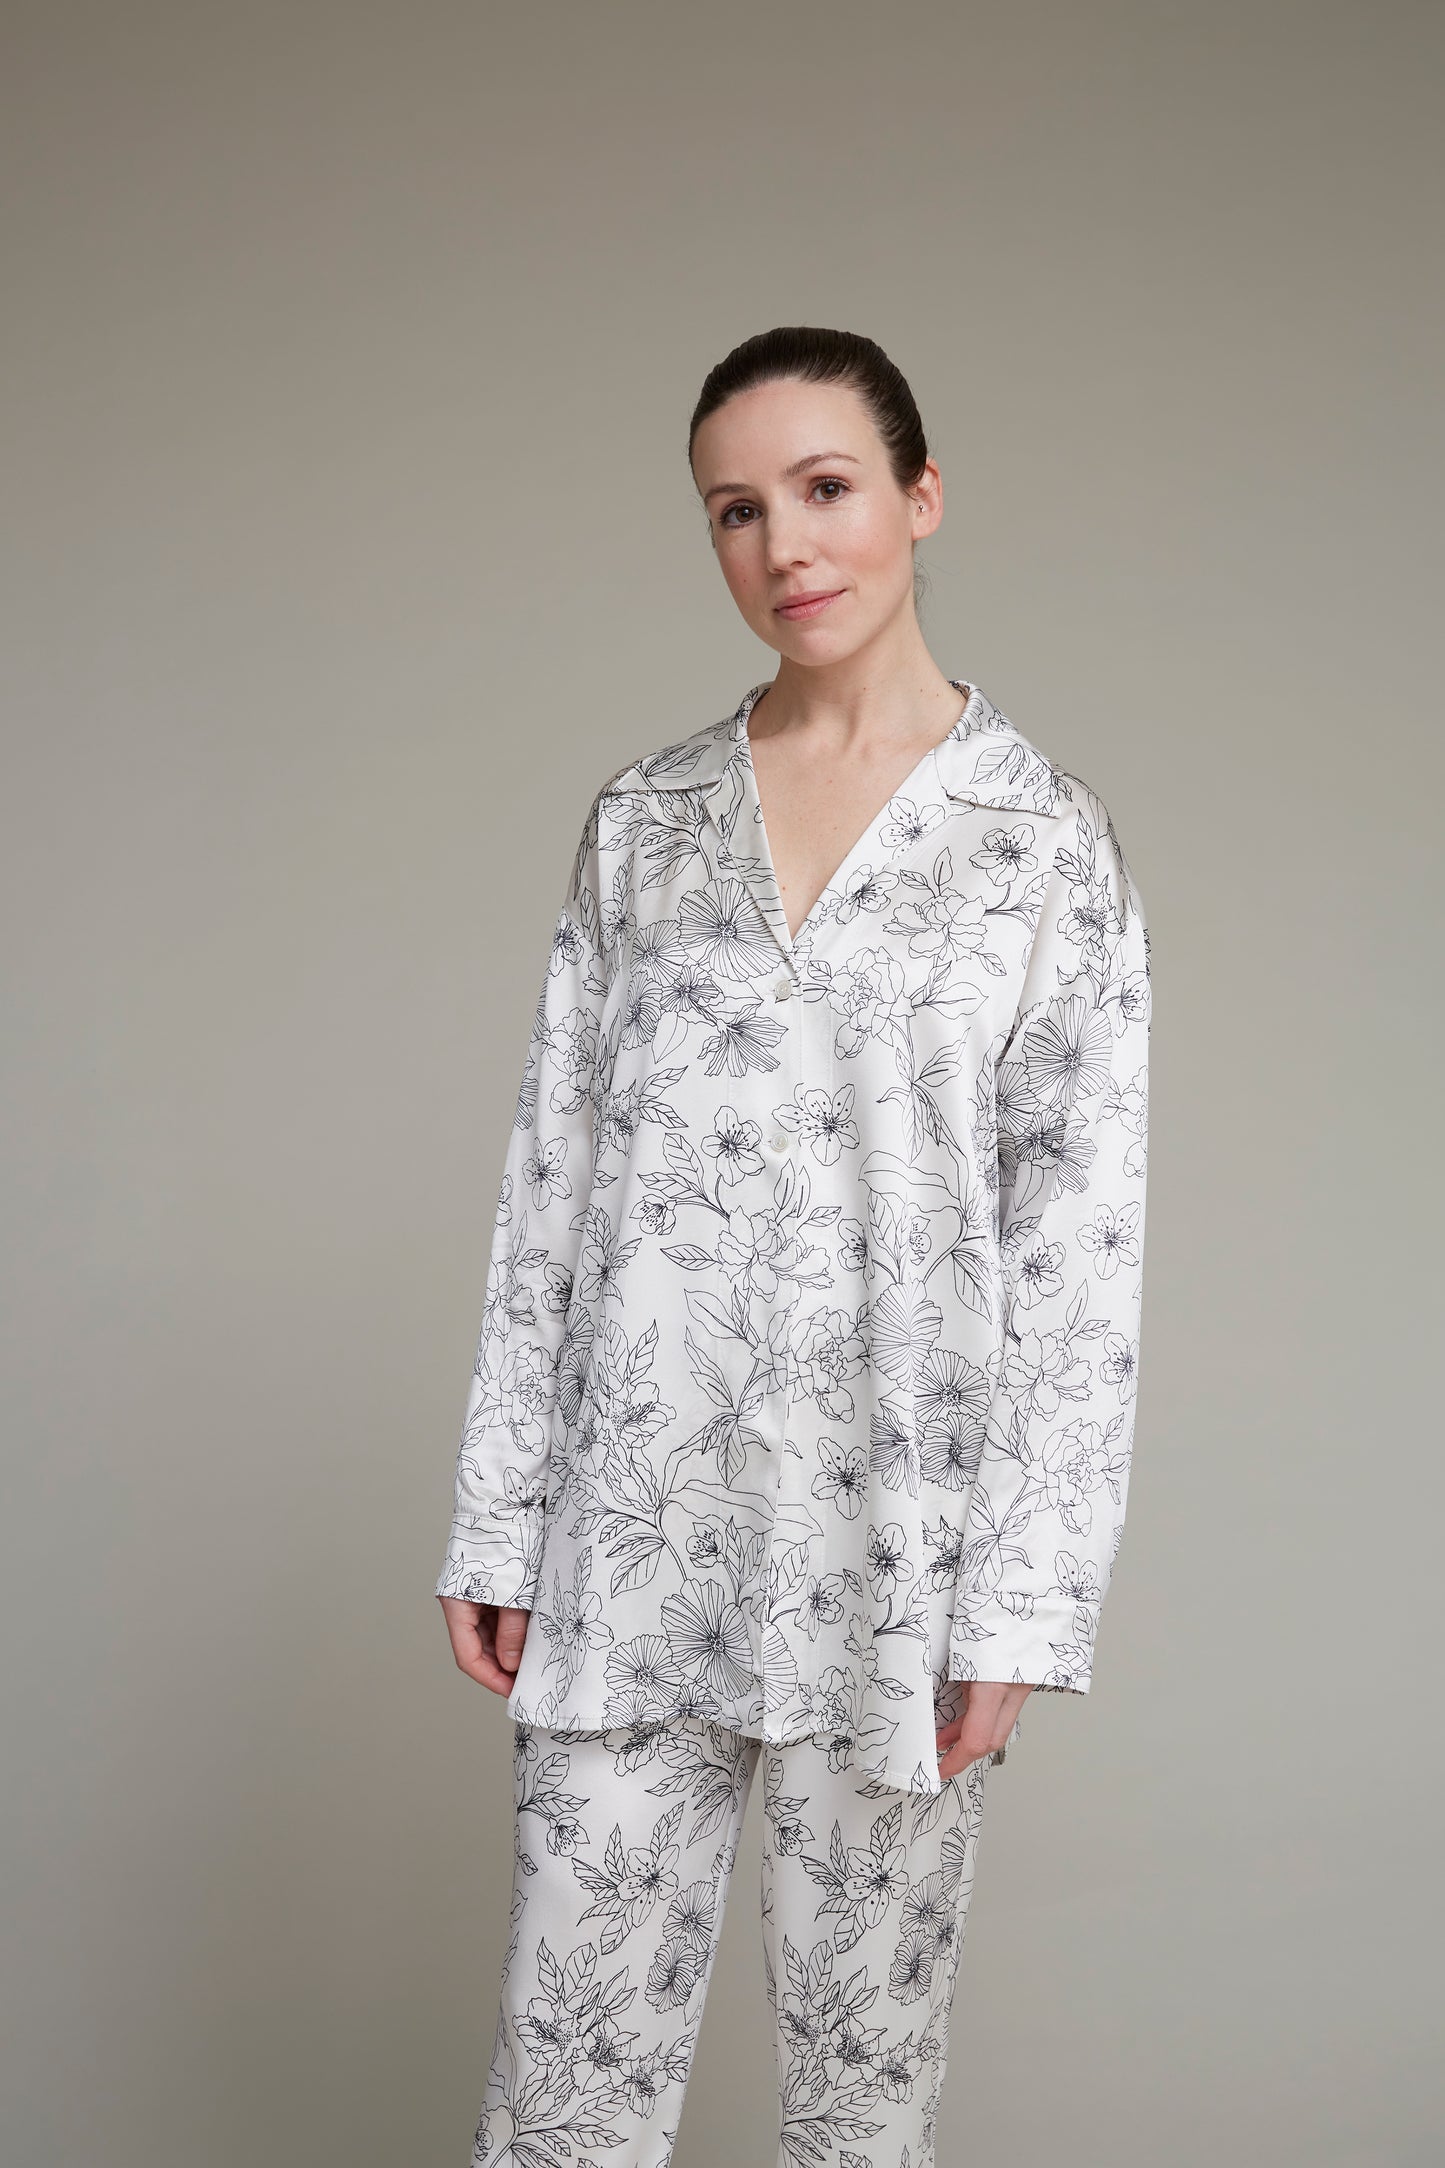 Close-up of a woman facing forward wearing a white floral-print loungewear pajama set, highlighting intricate details of the shirt and pants against a neutral background.